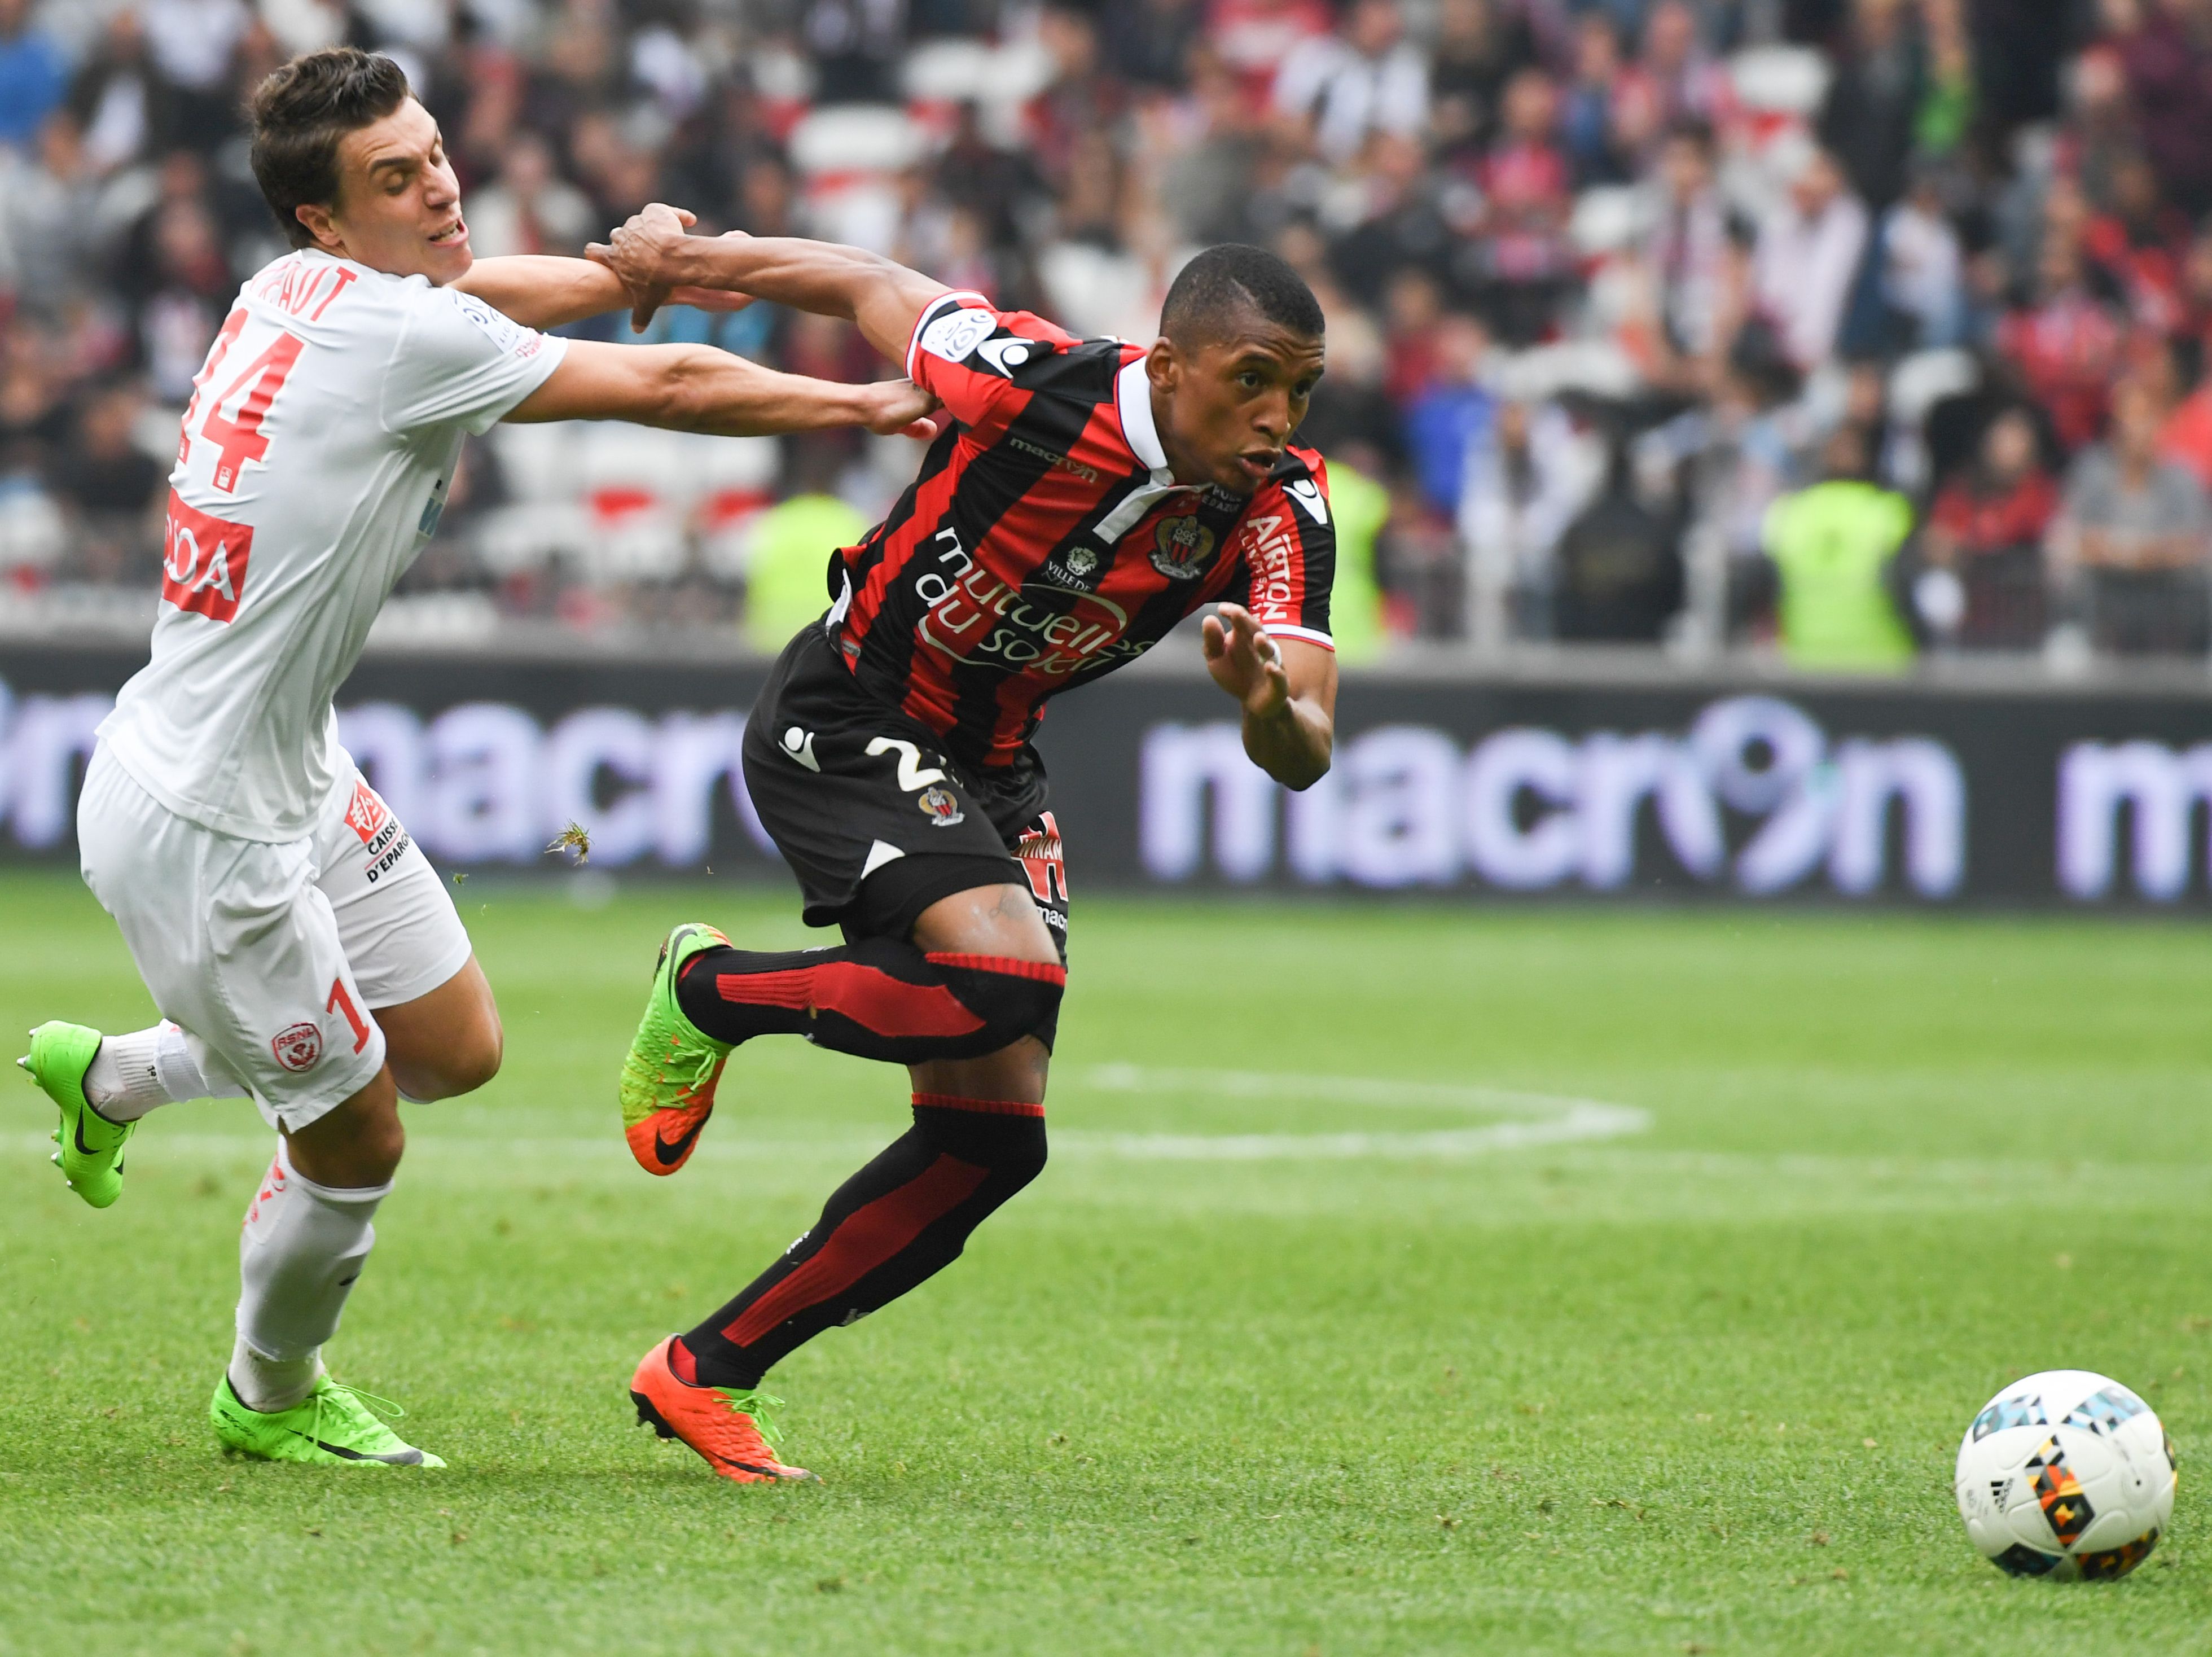 Nice's Brazilian defender Dalbert Henrique (R) runs with the ball as Nancy's French defender Joffrey Cuffaut (L) attempts to block him during the French L1 Football match between OGC Nice and AS Nancy Lorraine at the Allianz Riviera Stadium, in Nice, on April 15, 2017. / AFP PHOTO / Yann COATSALIOU        (Photo credit should read YANN COATSALIOU/AFP/Getty Images)